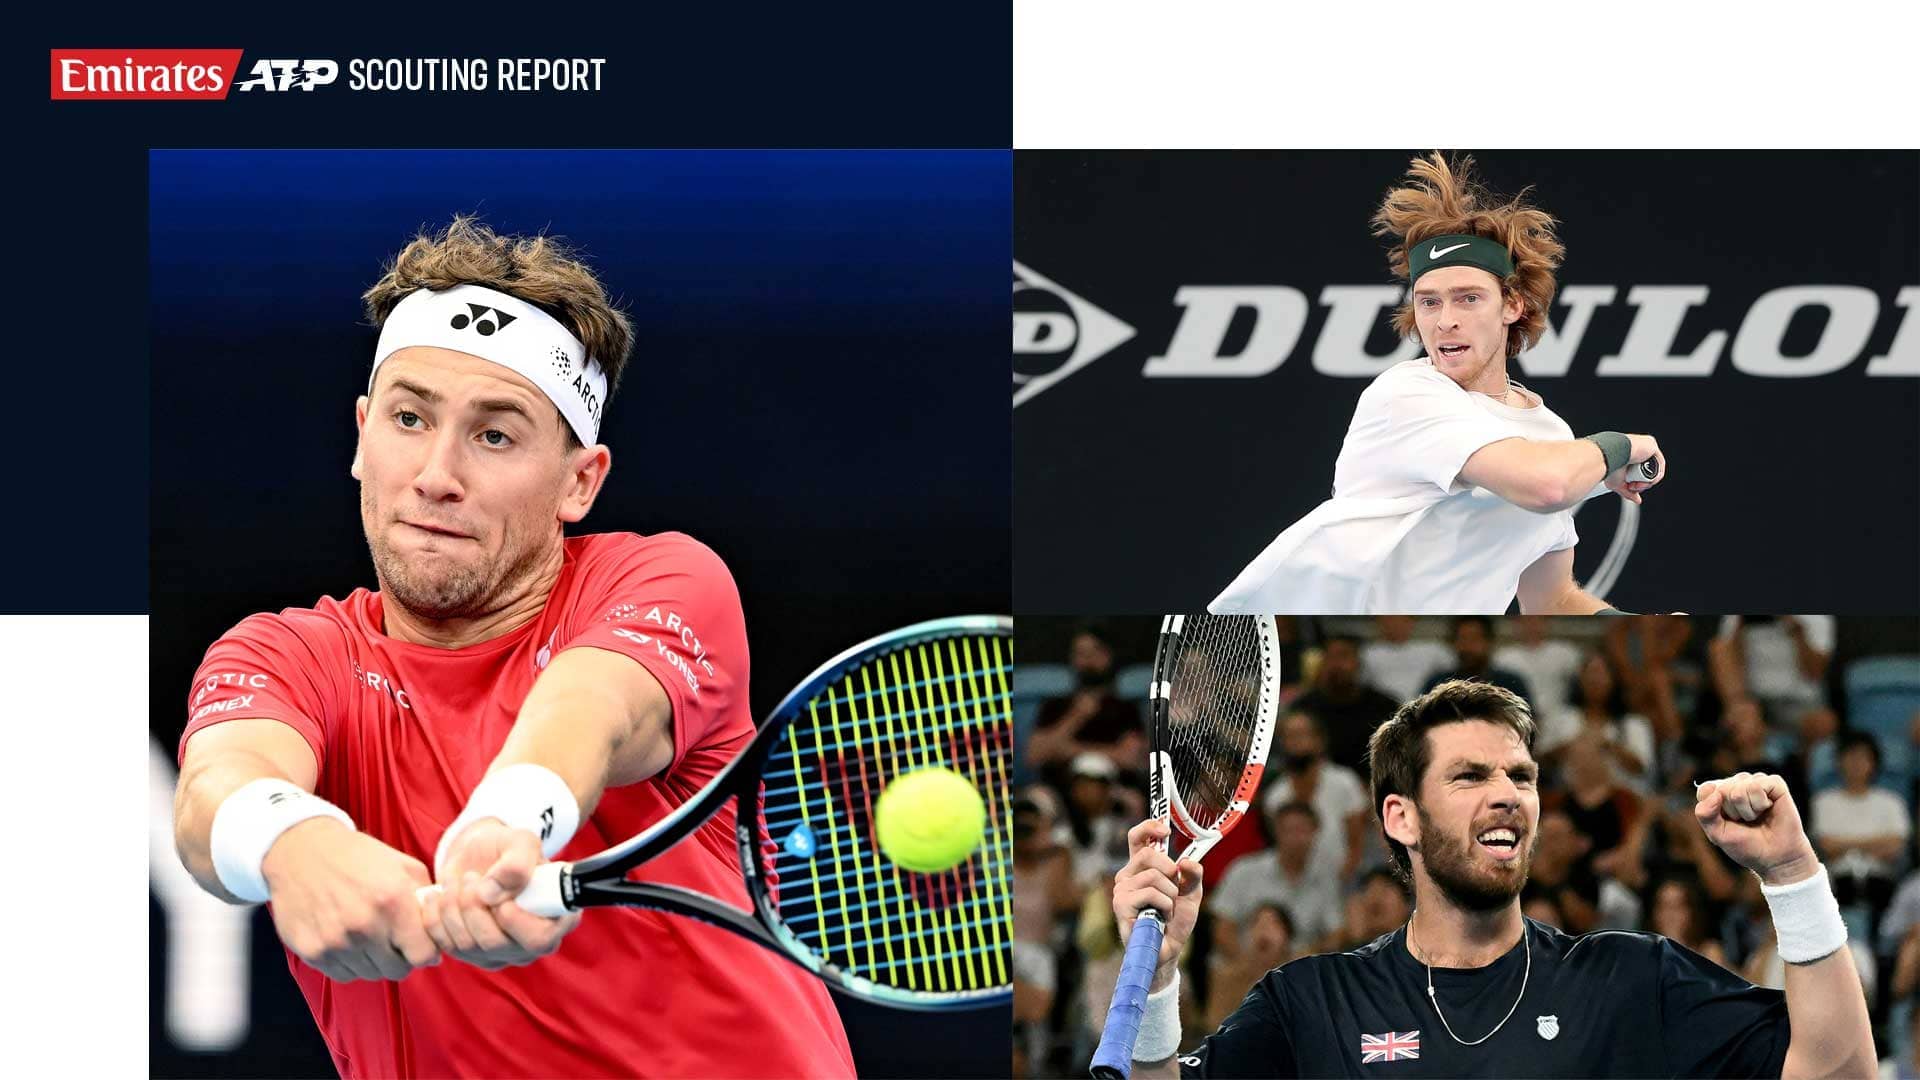 Casper Ruud, Andrey Rublev and Cameron Norrie are among the players to watch this week.